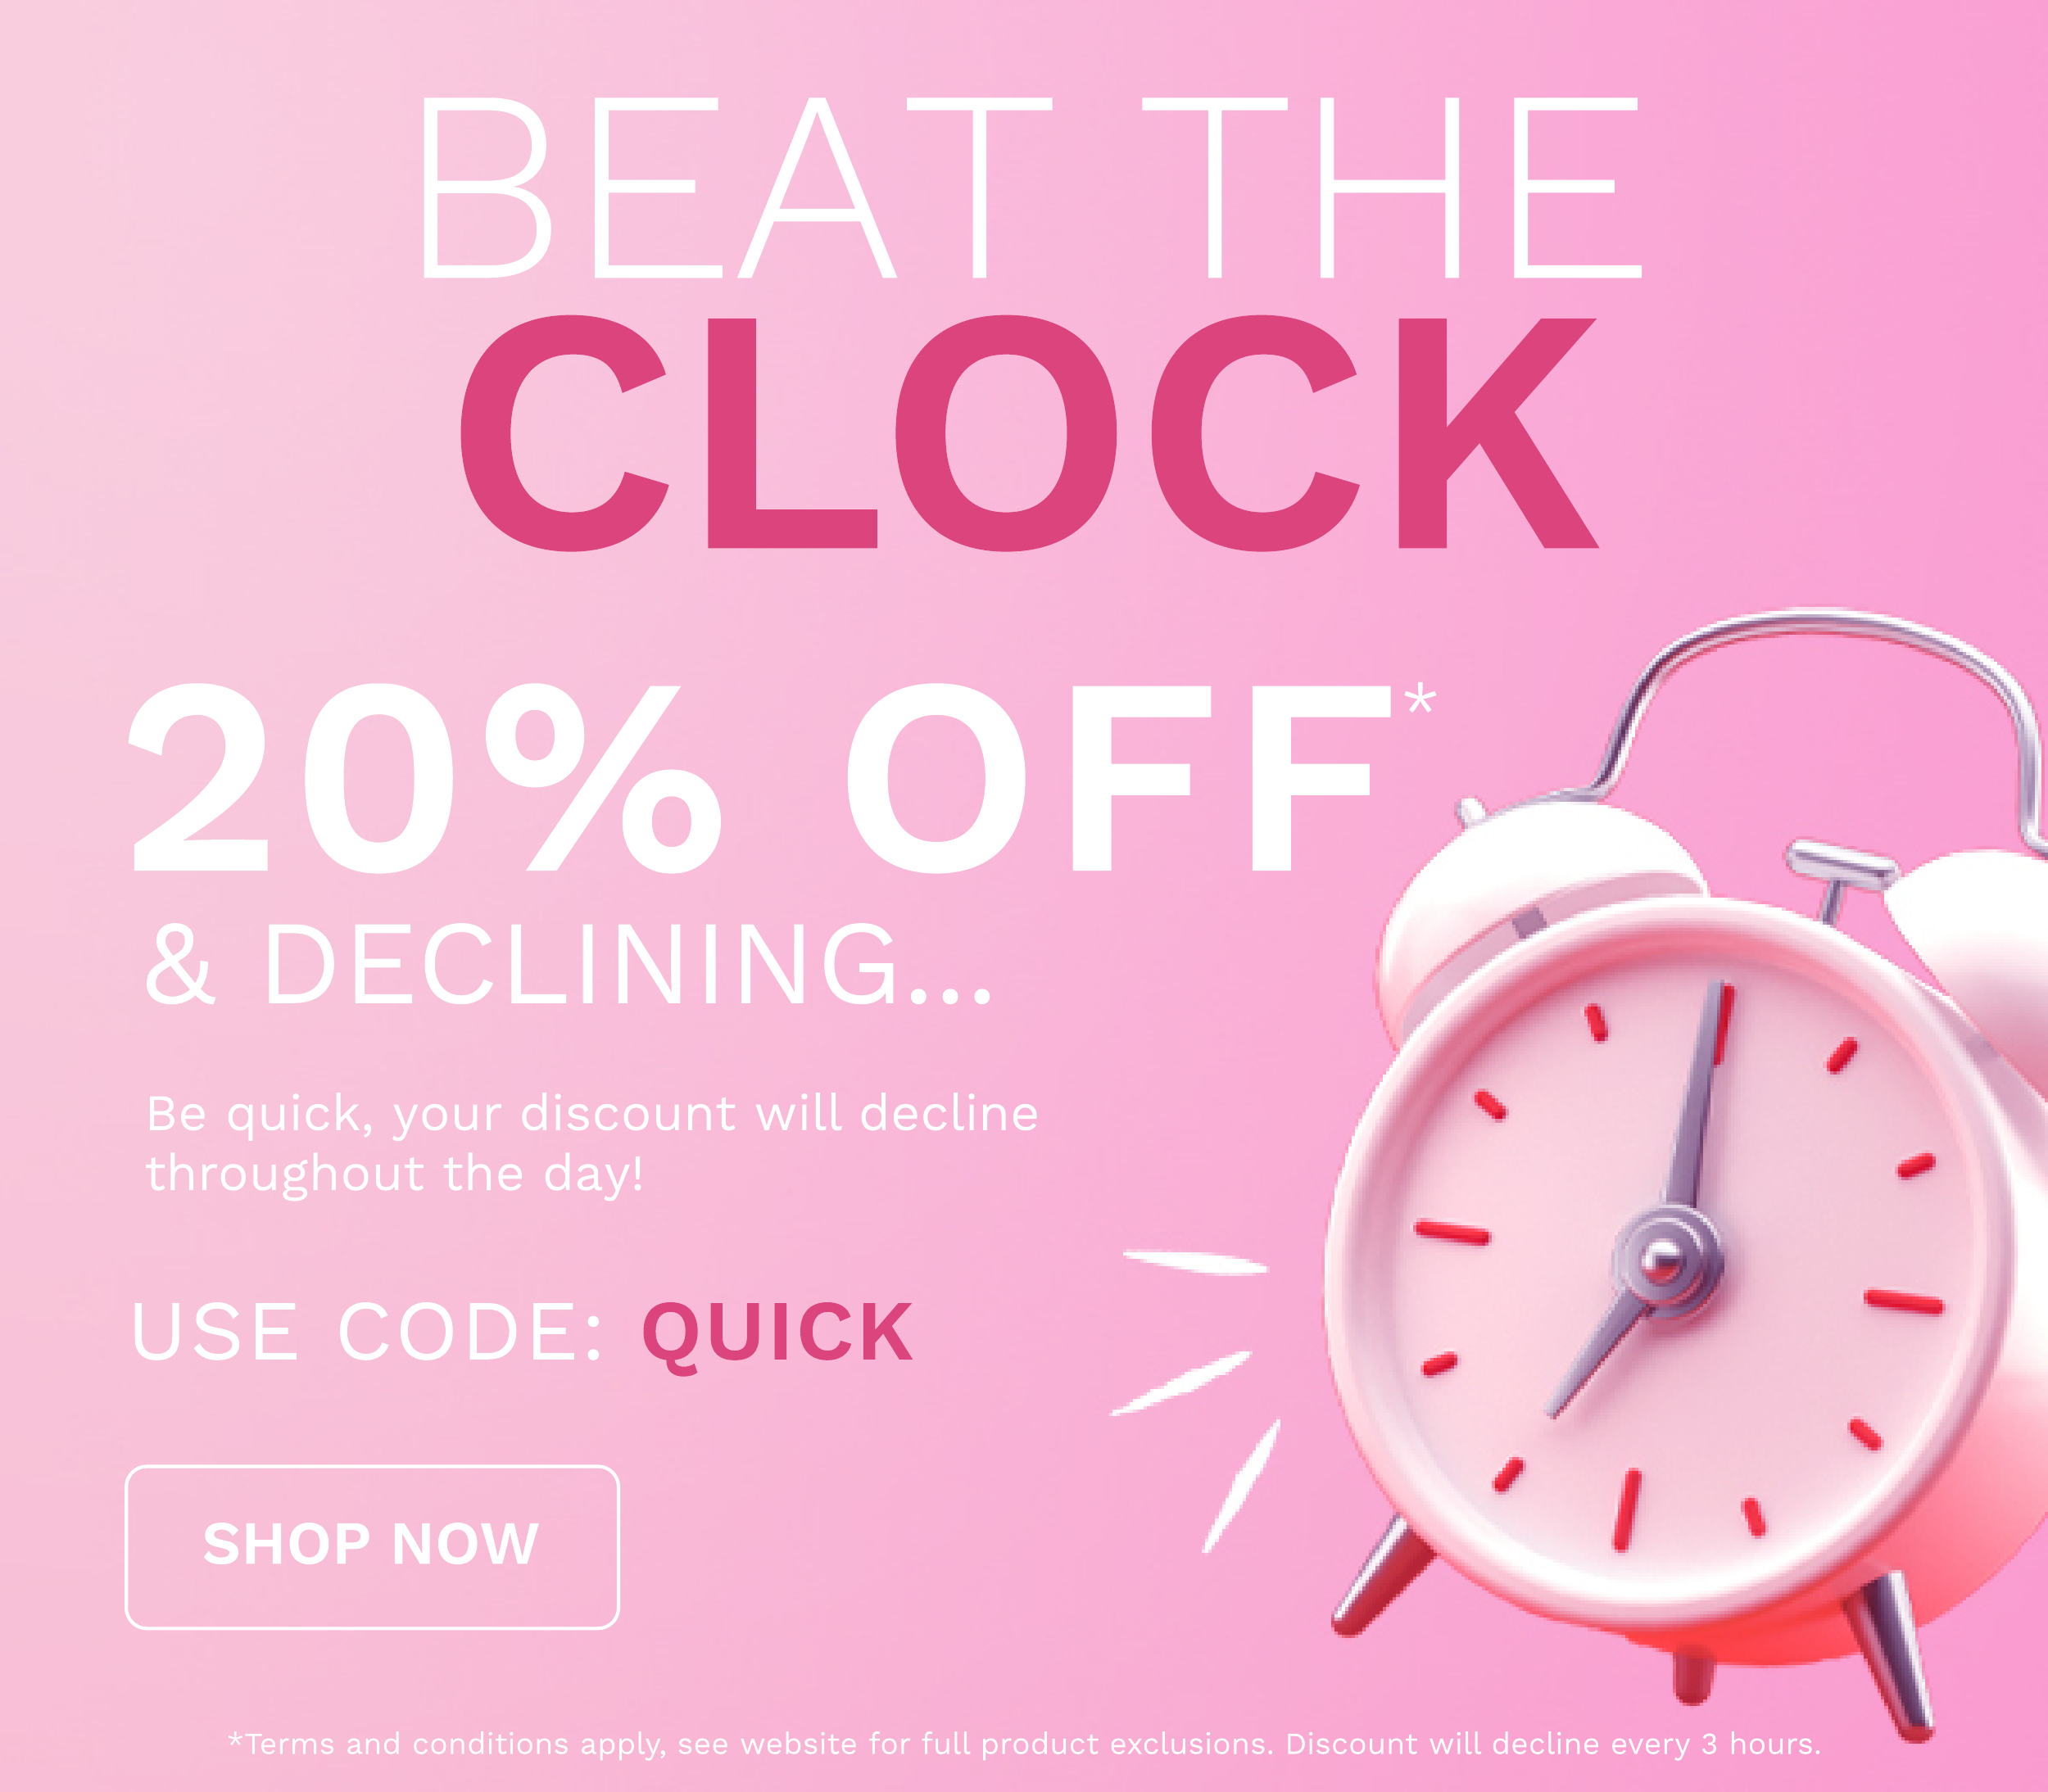 20 percent off and declining every 3 hours